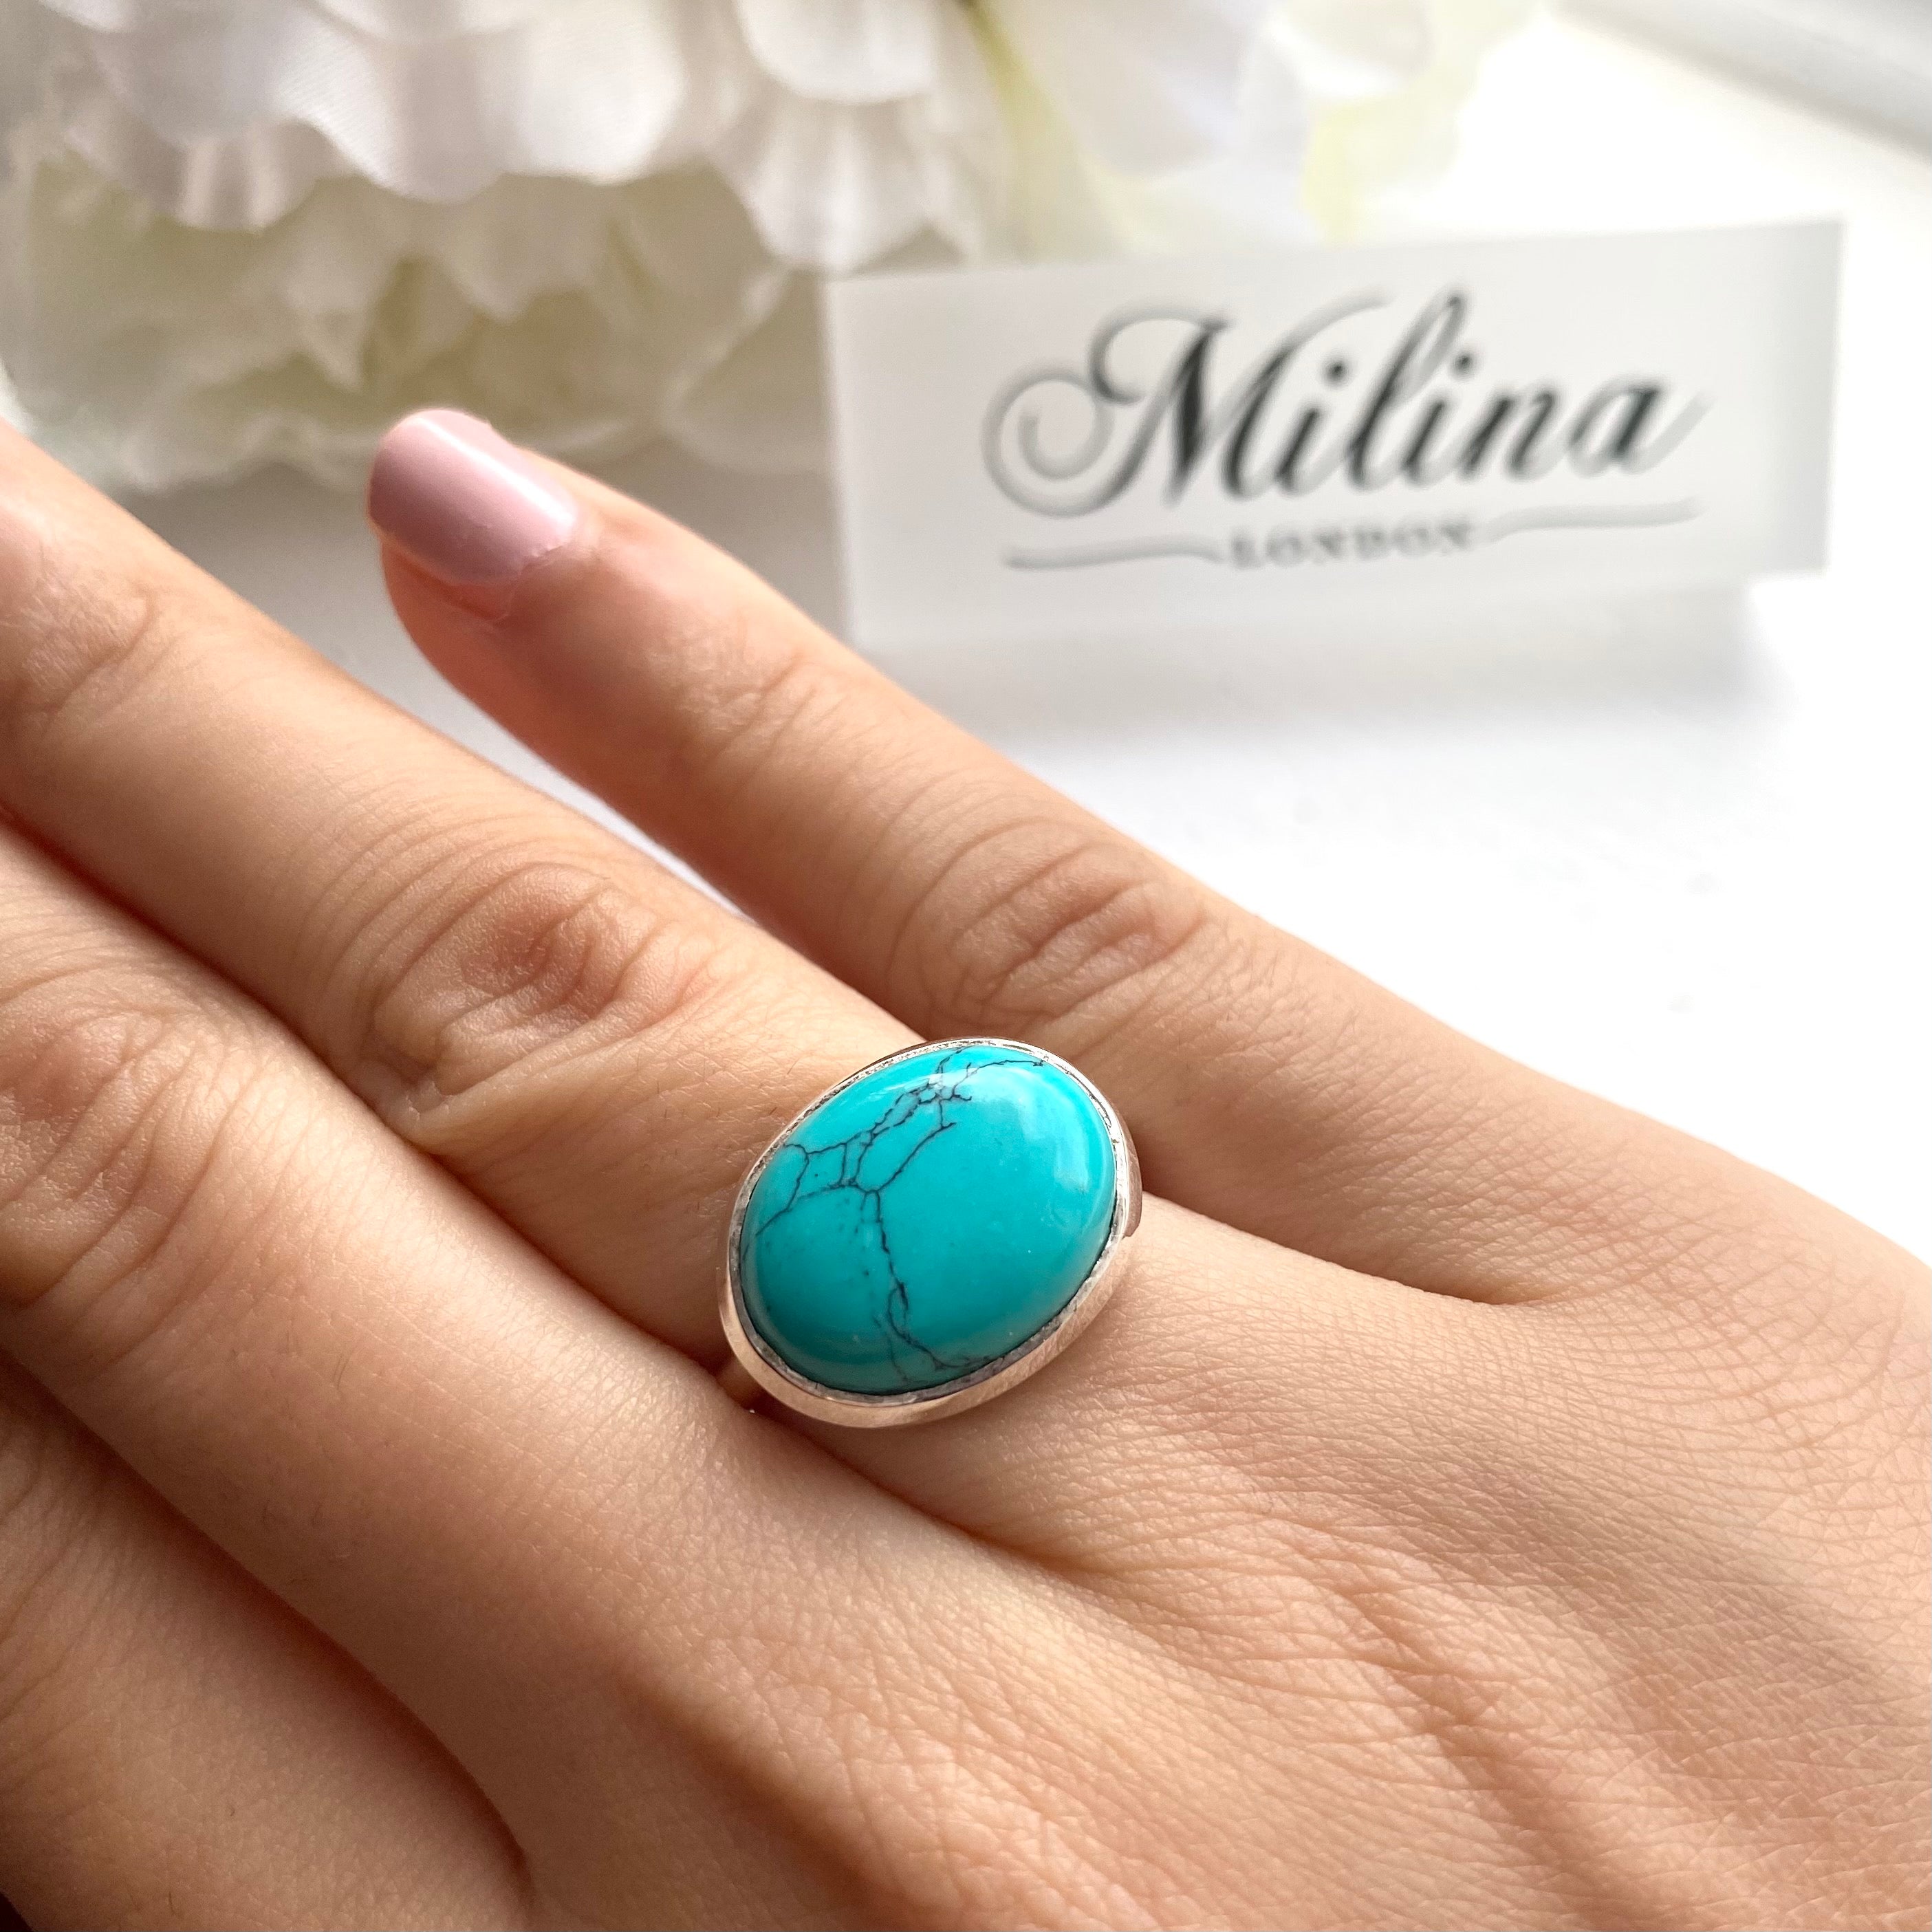 Cabochon Oval Cut Natural Gemstone Sterling Silver Ring - Turquoise